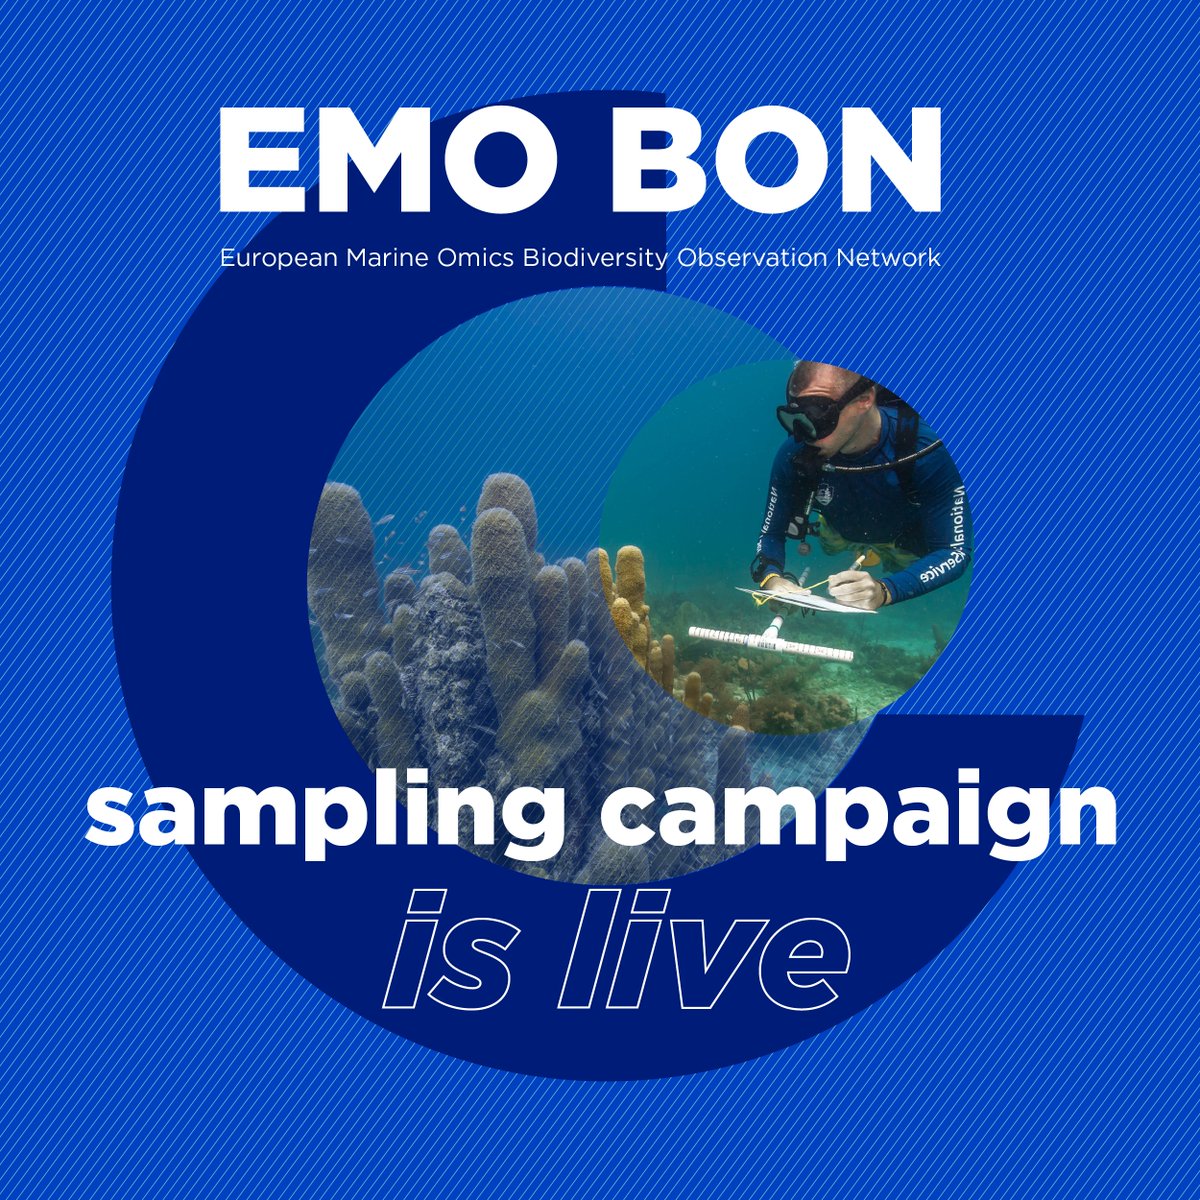 📢 #EMOBON’s first 2024 sampling is live !

👉 Scientists will be sampling the #WaterColumn & microorganisms from soft substrates

💡 Keep complete metadata records
💡 Fill in spreadsheets asap after your sampling event
💡 Share pics & videos on social media

#OceanObservation